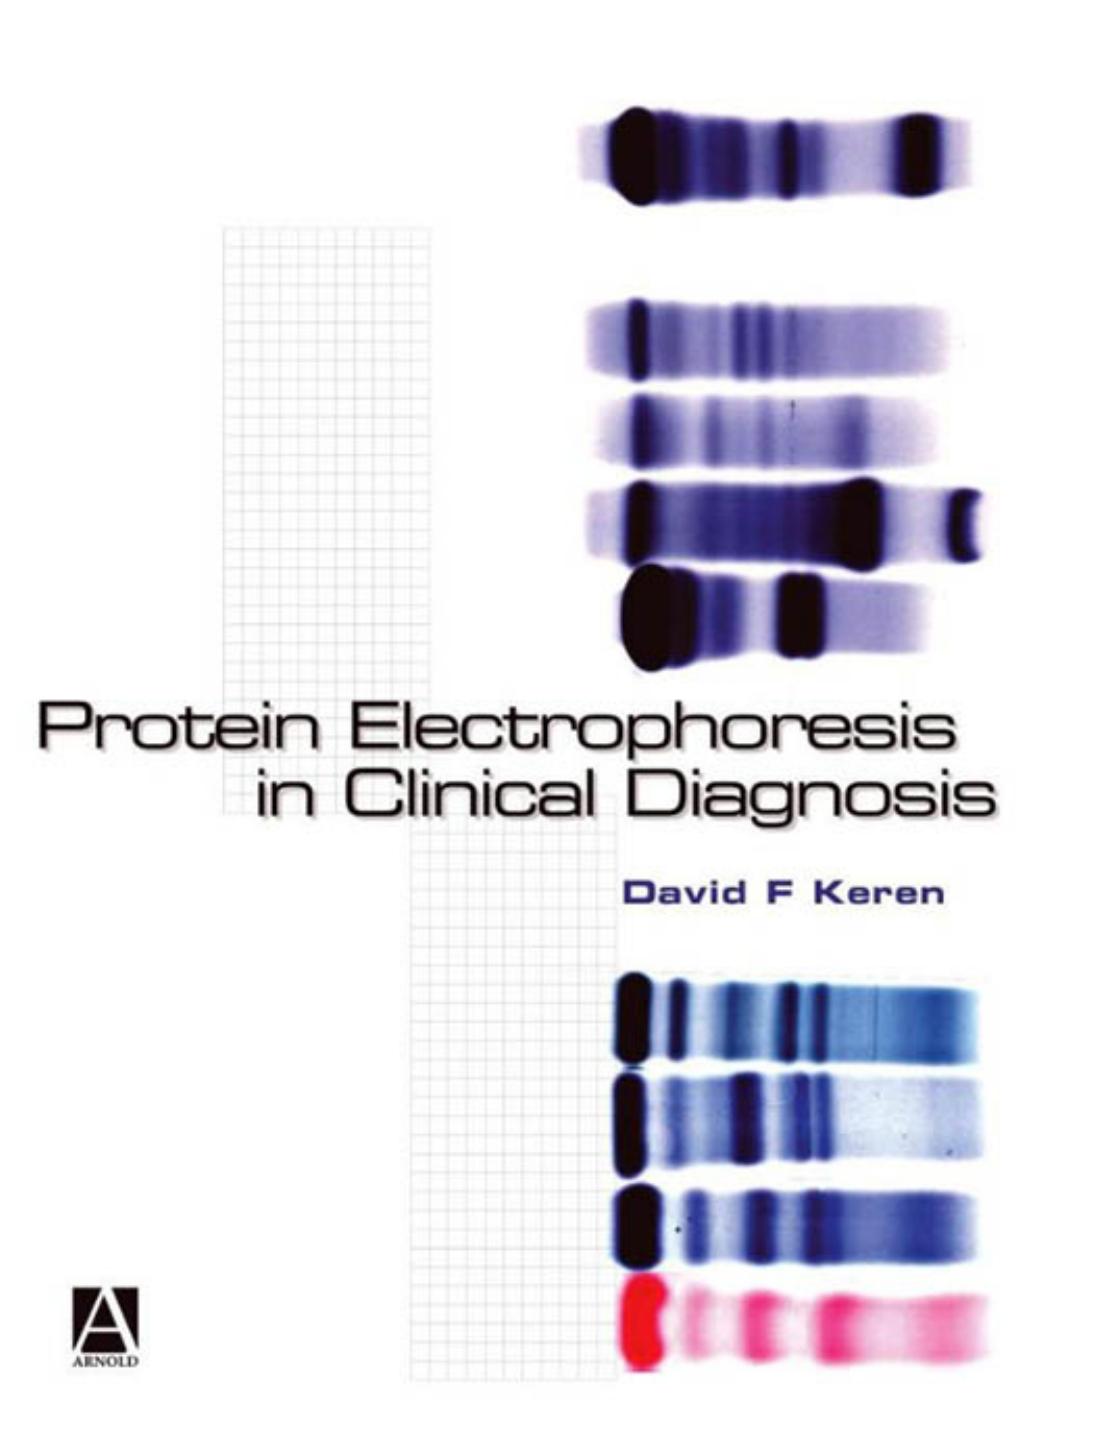 Protein Electrophoresis in Clinical Diagnosis